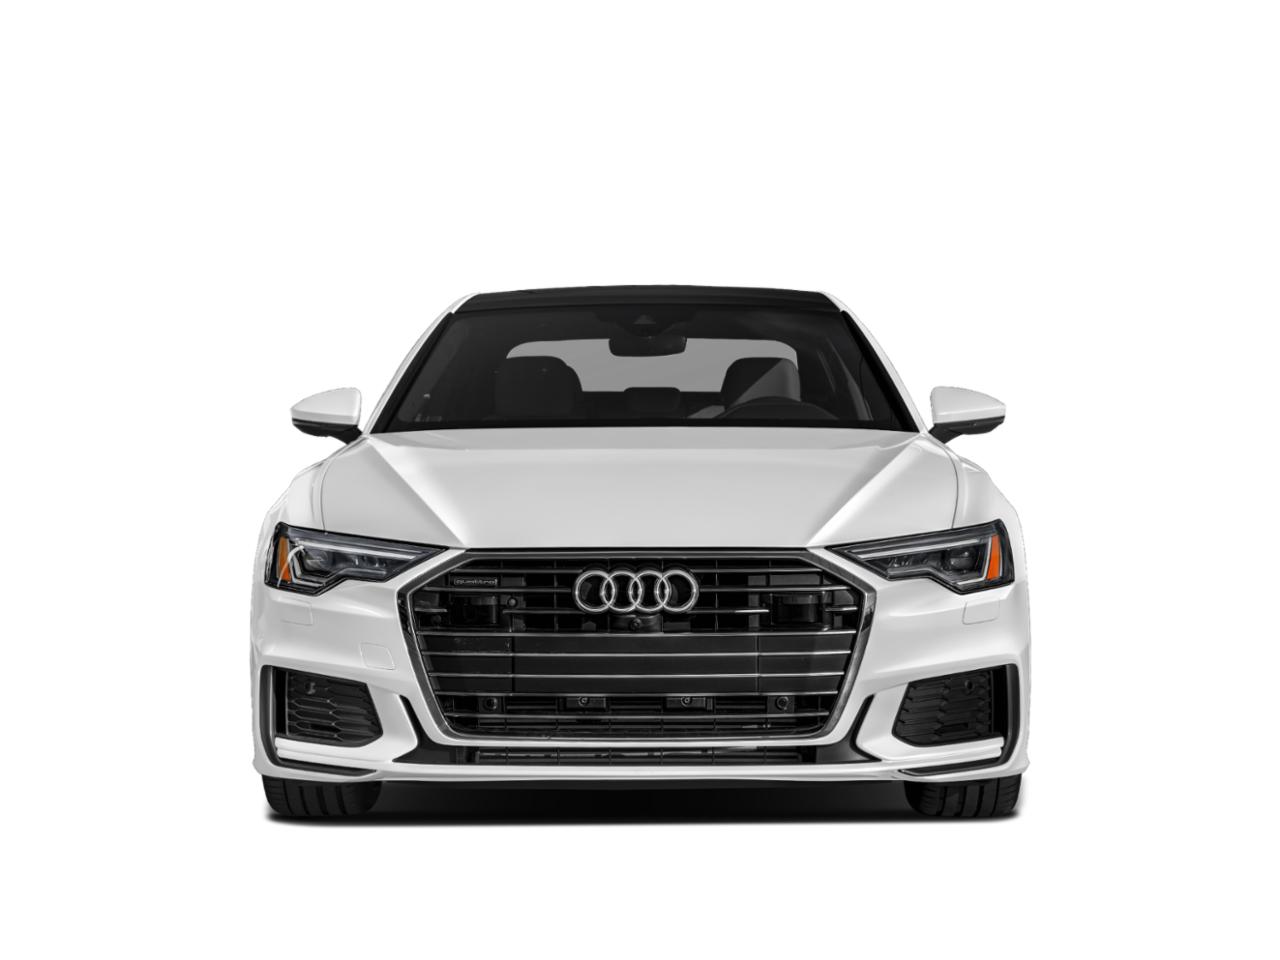 2019 Audi A6 Vehicle Photo in Allentown, PA 18103